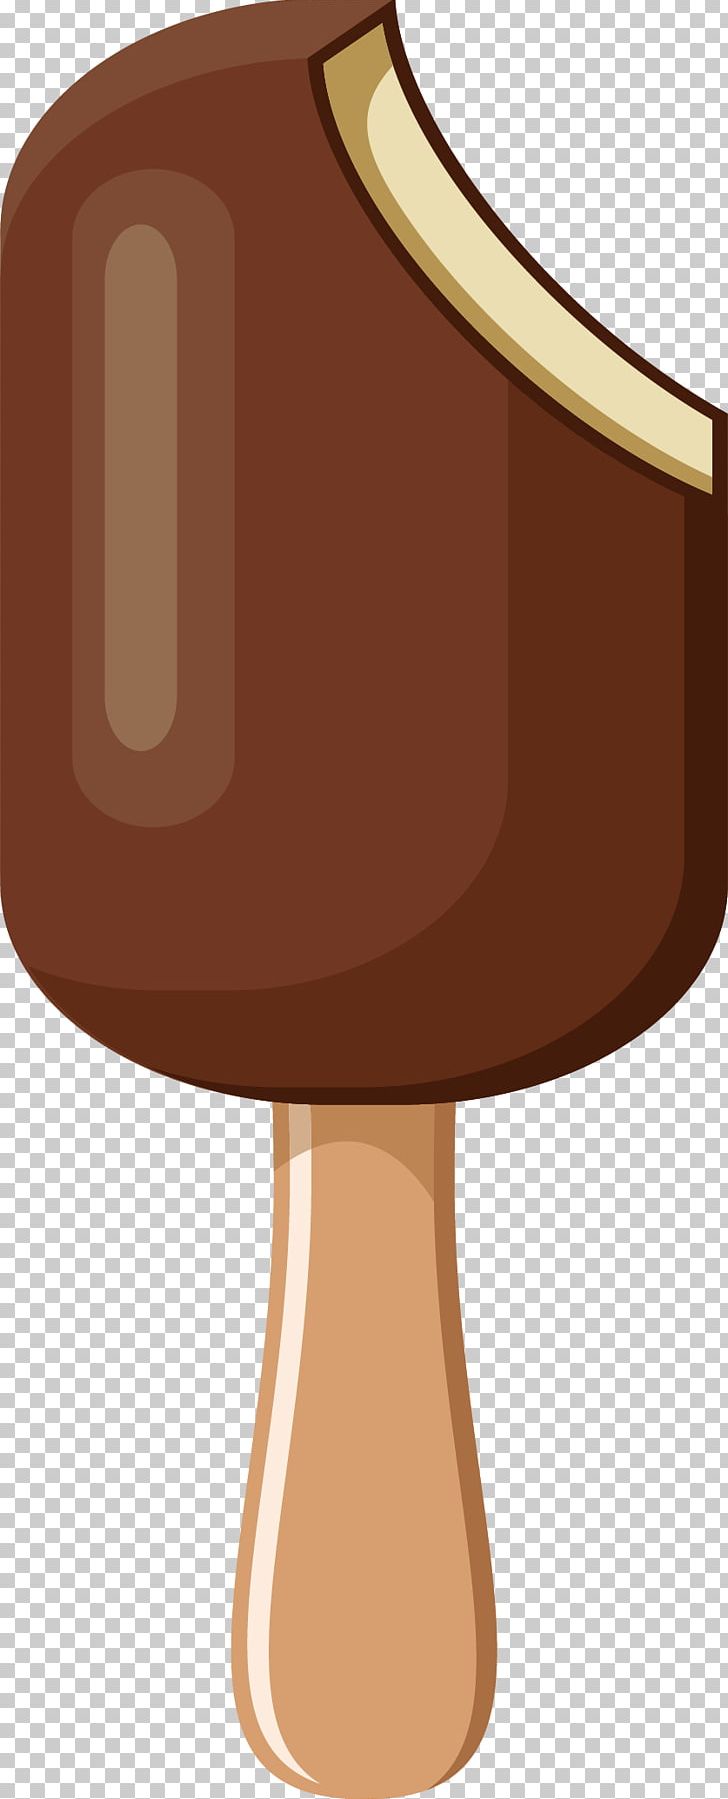 Chocolate Ice Cream Ganache Caramel Color PNG, Clipart, Brown, Cara, Cartoon, Chocolate, Chocolate Ice Cream Free PNG Download